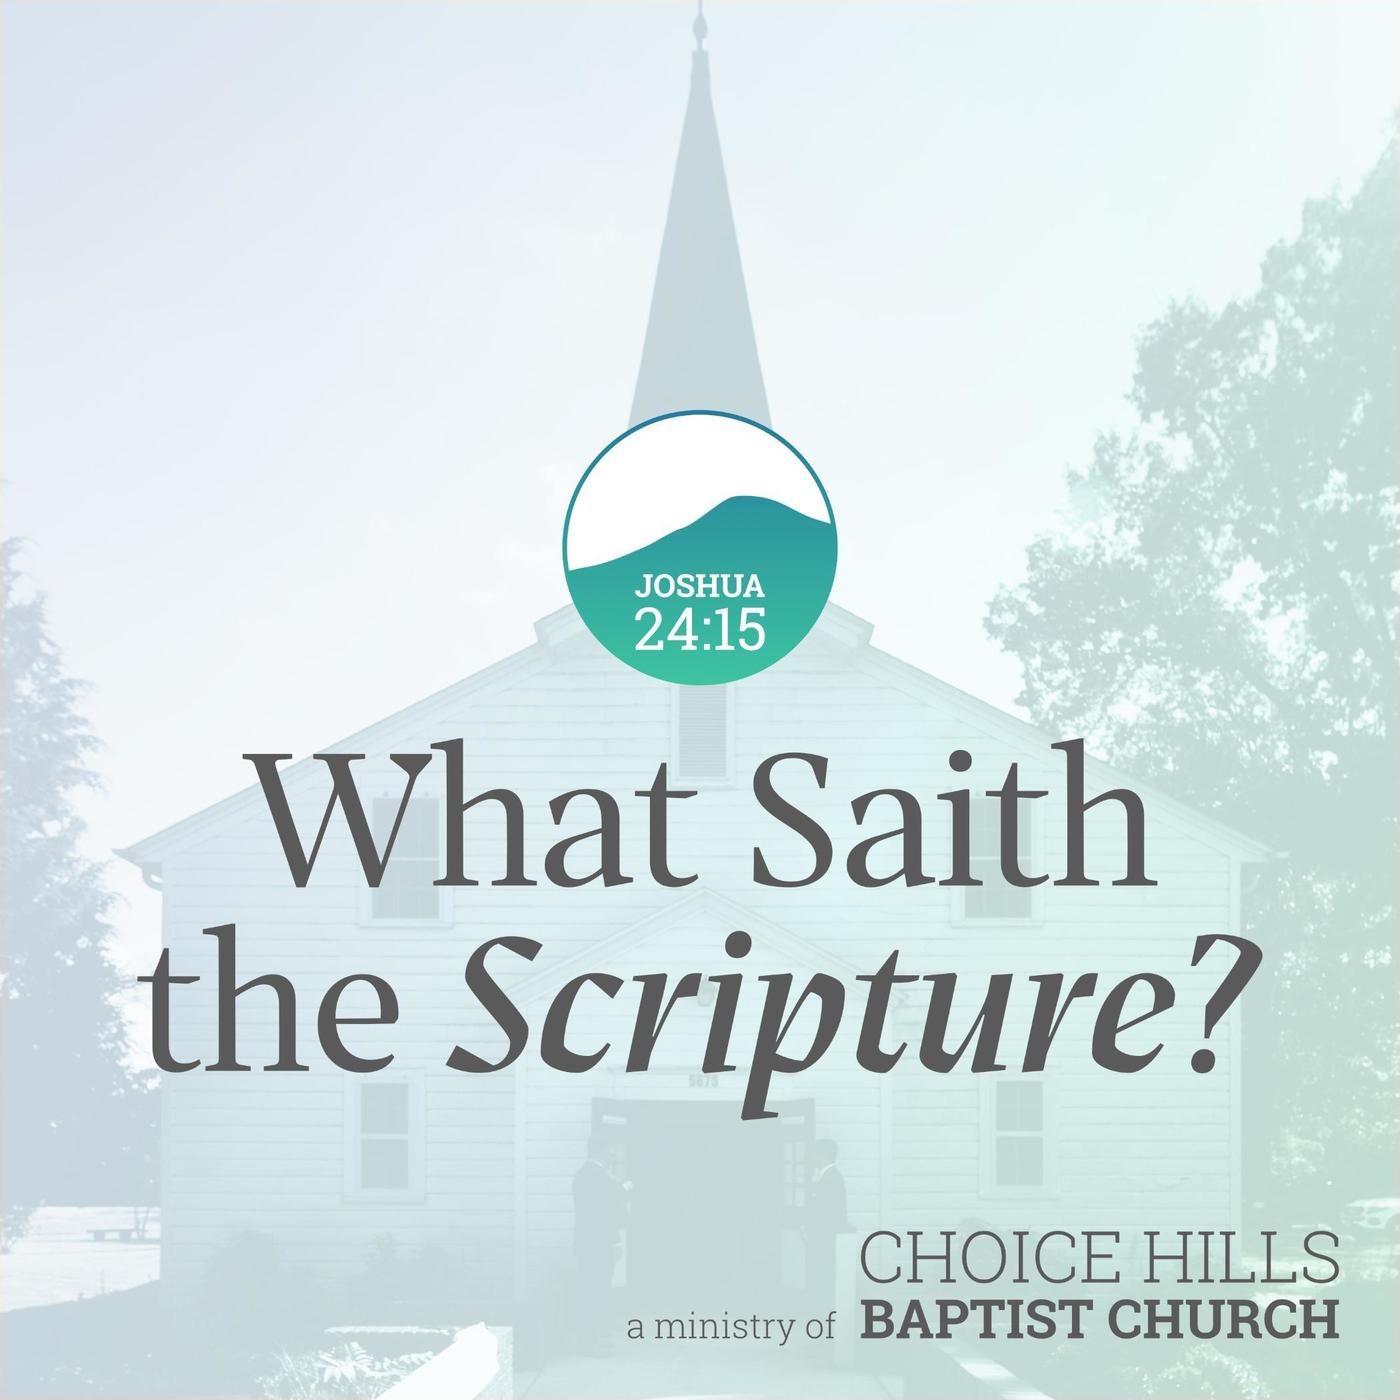 Adult Sunday School: Study of the 119th Psalm (Part 4)